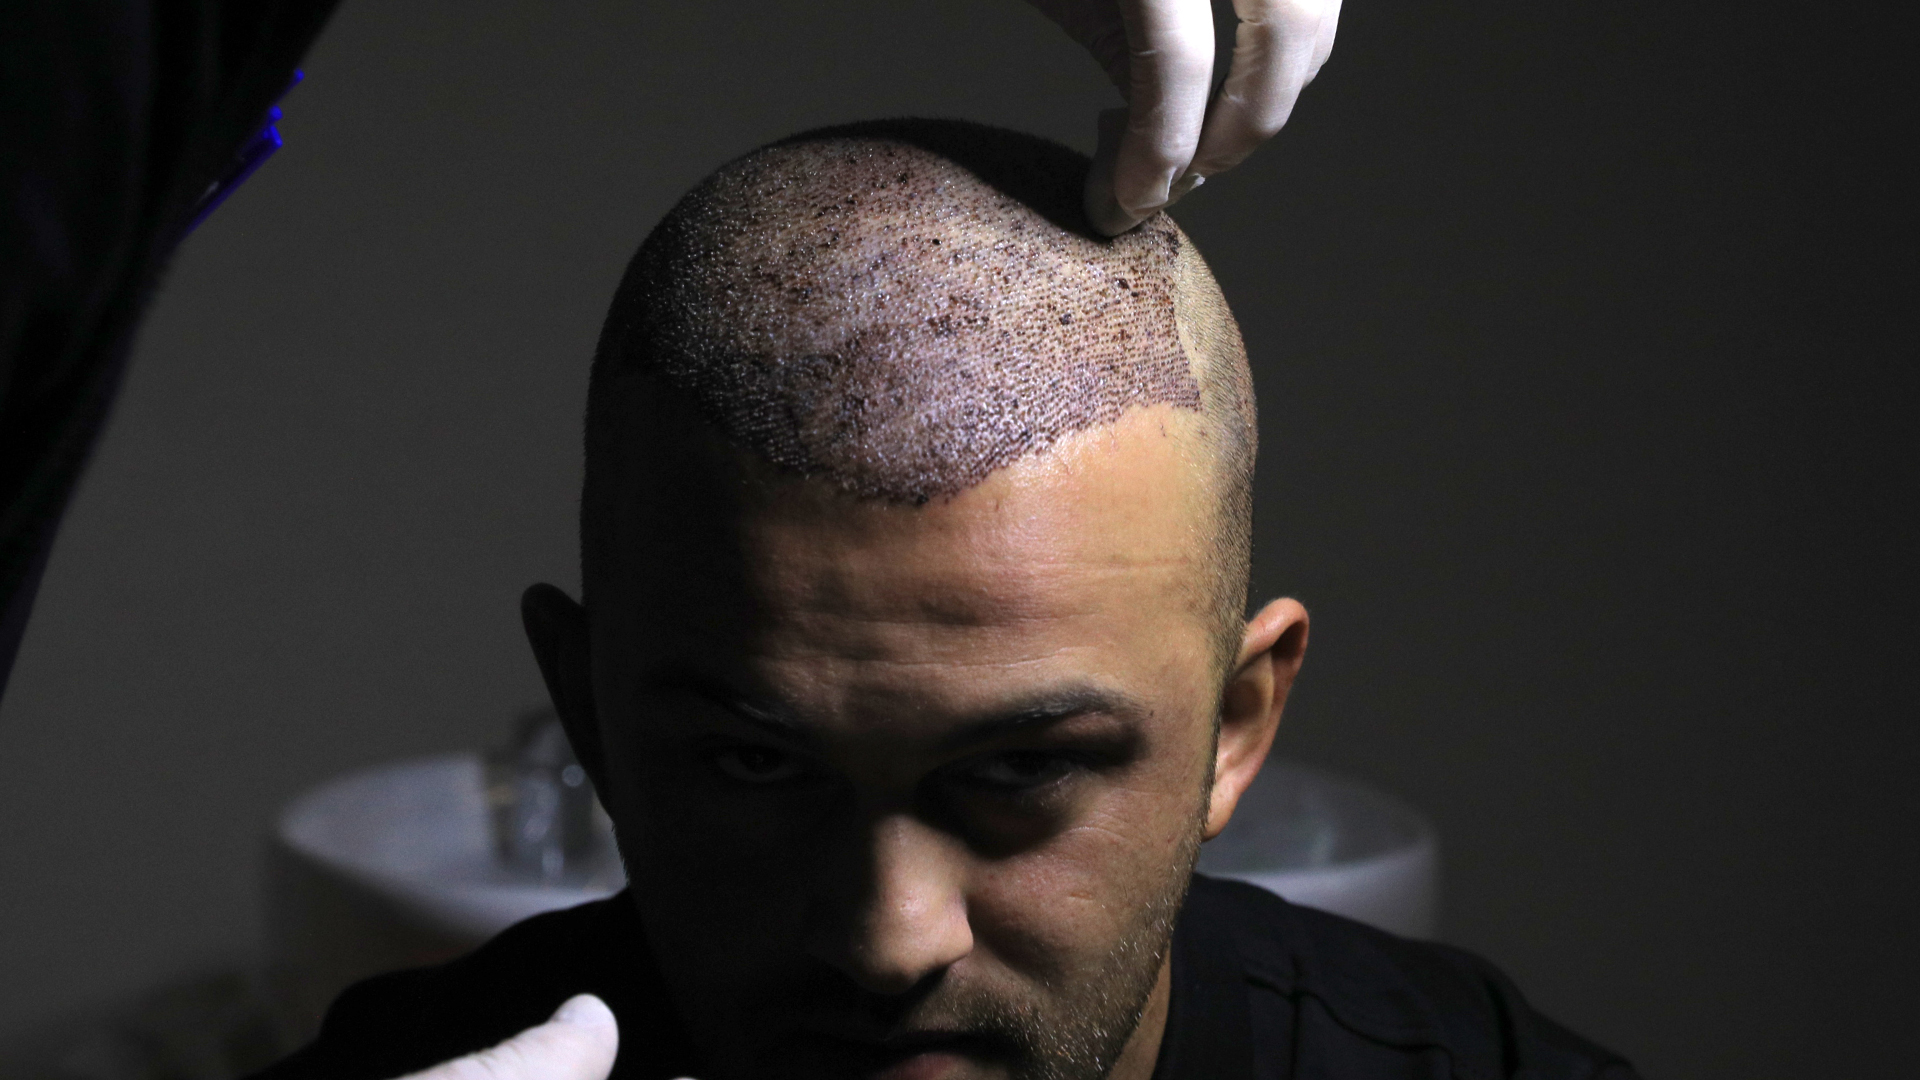 Hair transplant and scabs: everything you need to know about healing